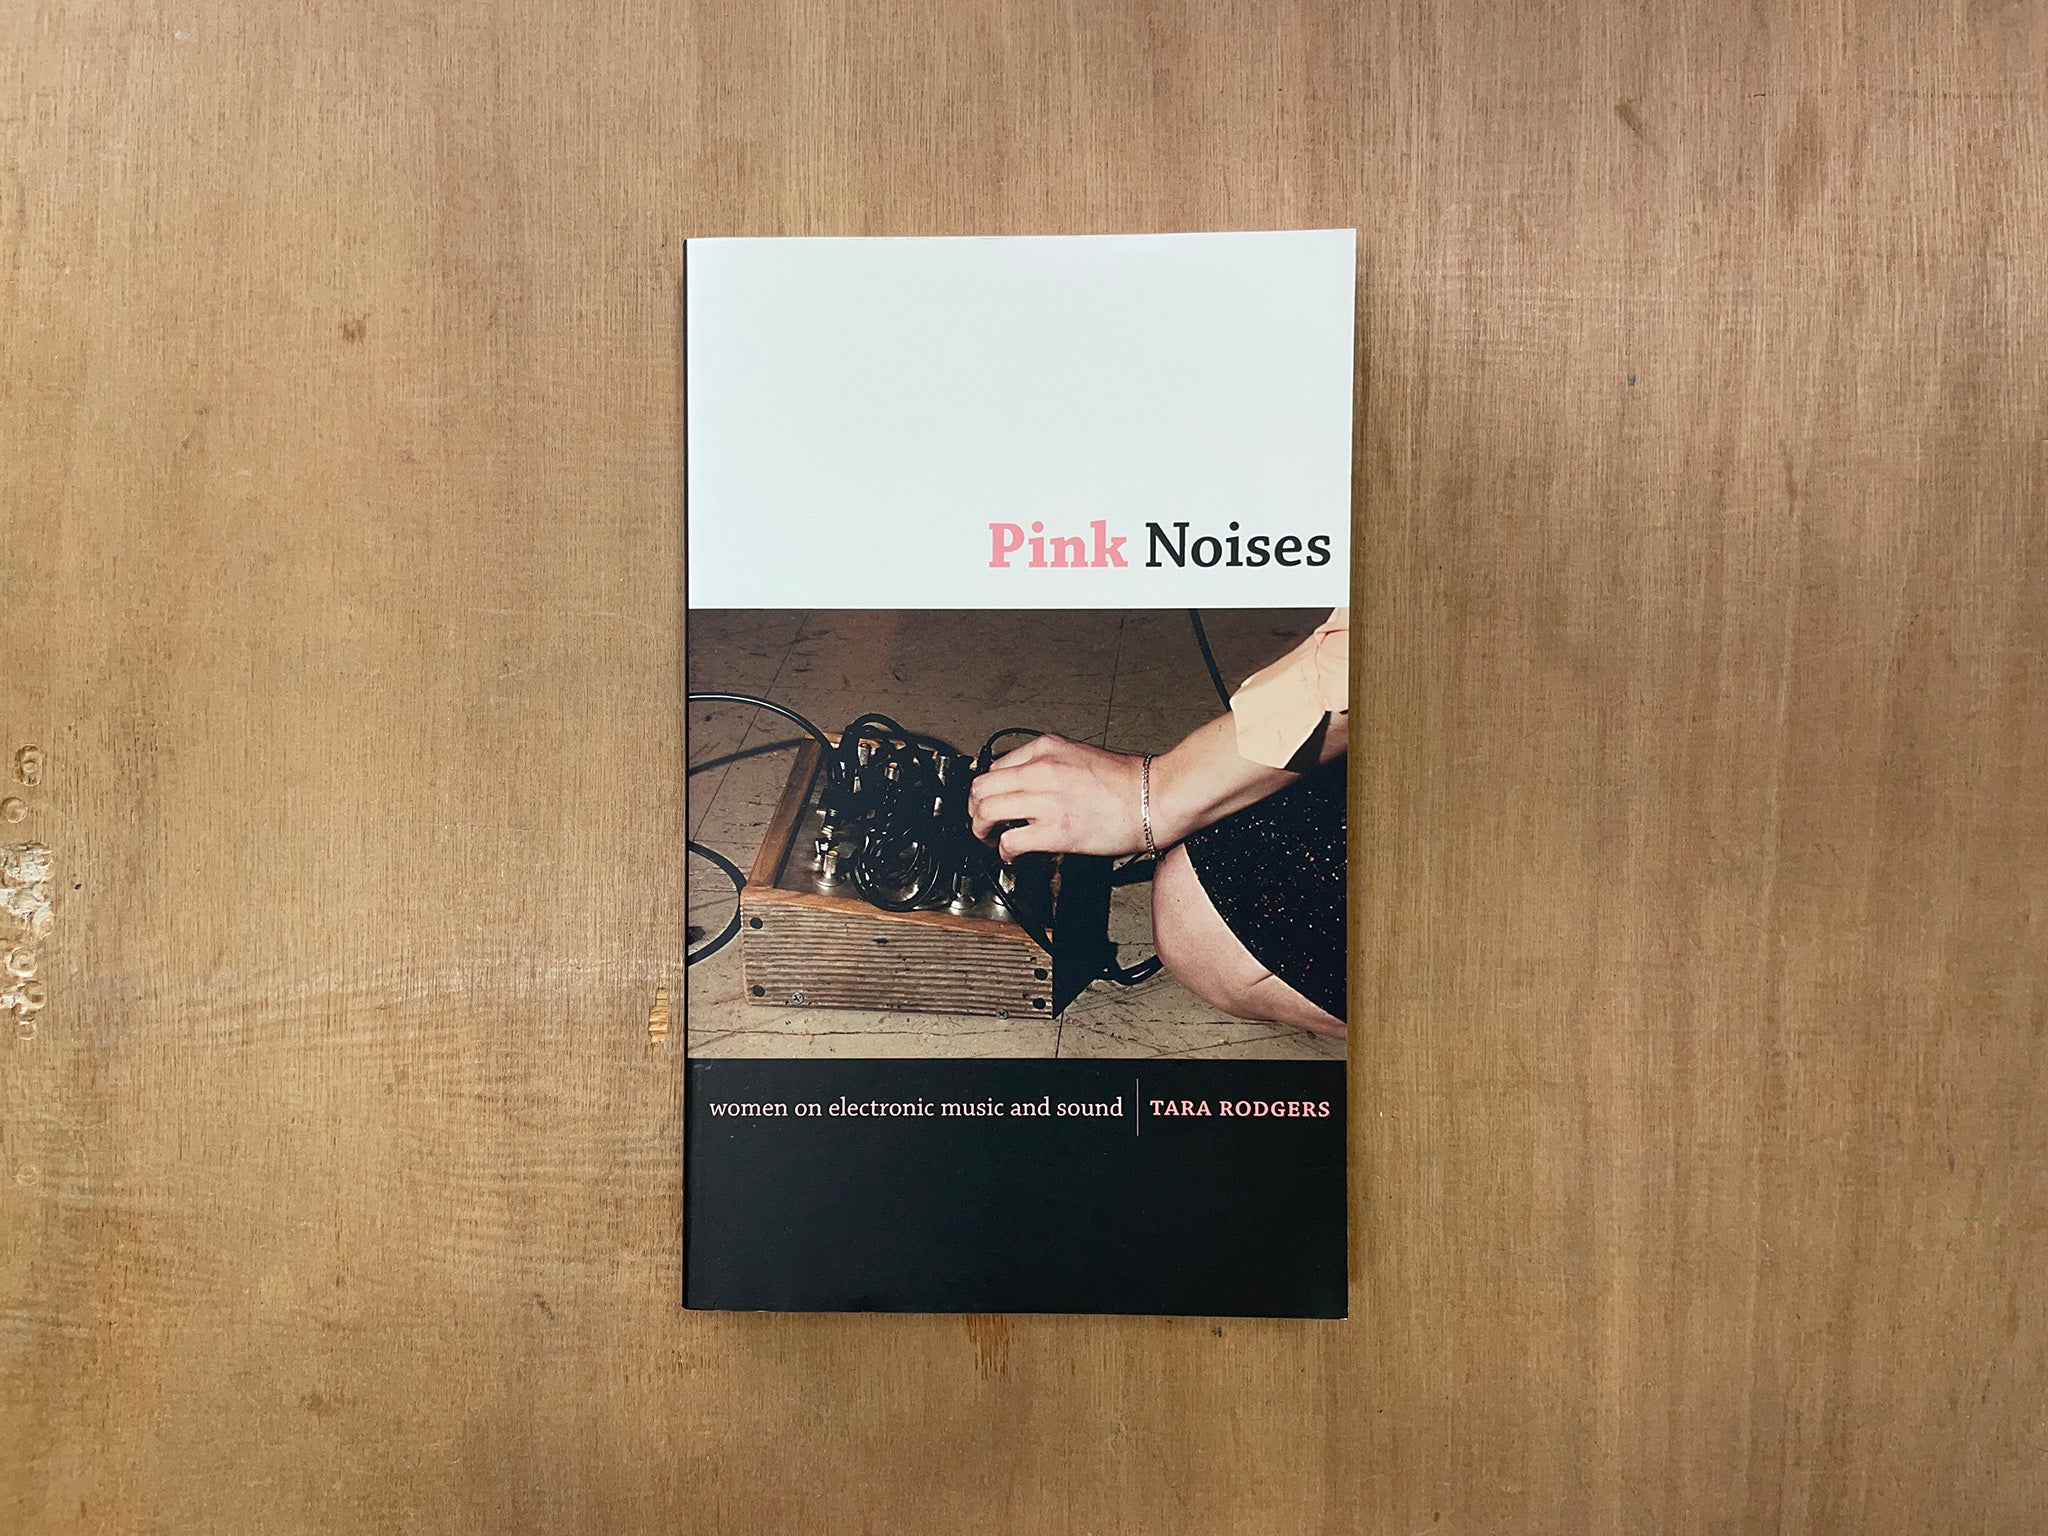 PINK NOISES: WOMEN ON ELECTRONIC MUSIC AND SOUND by Tara Rodgers